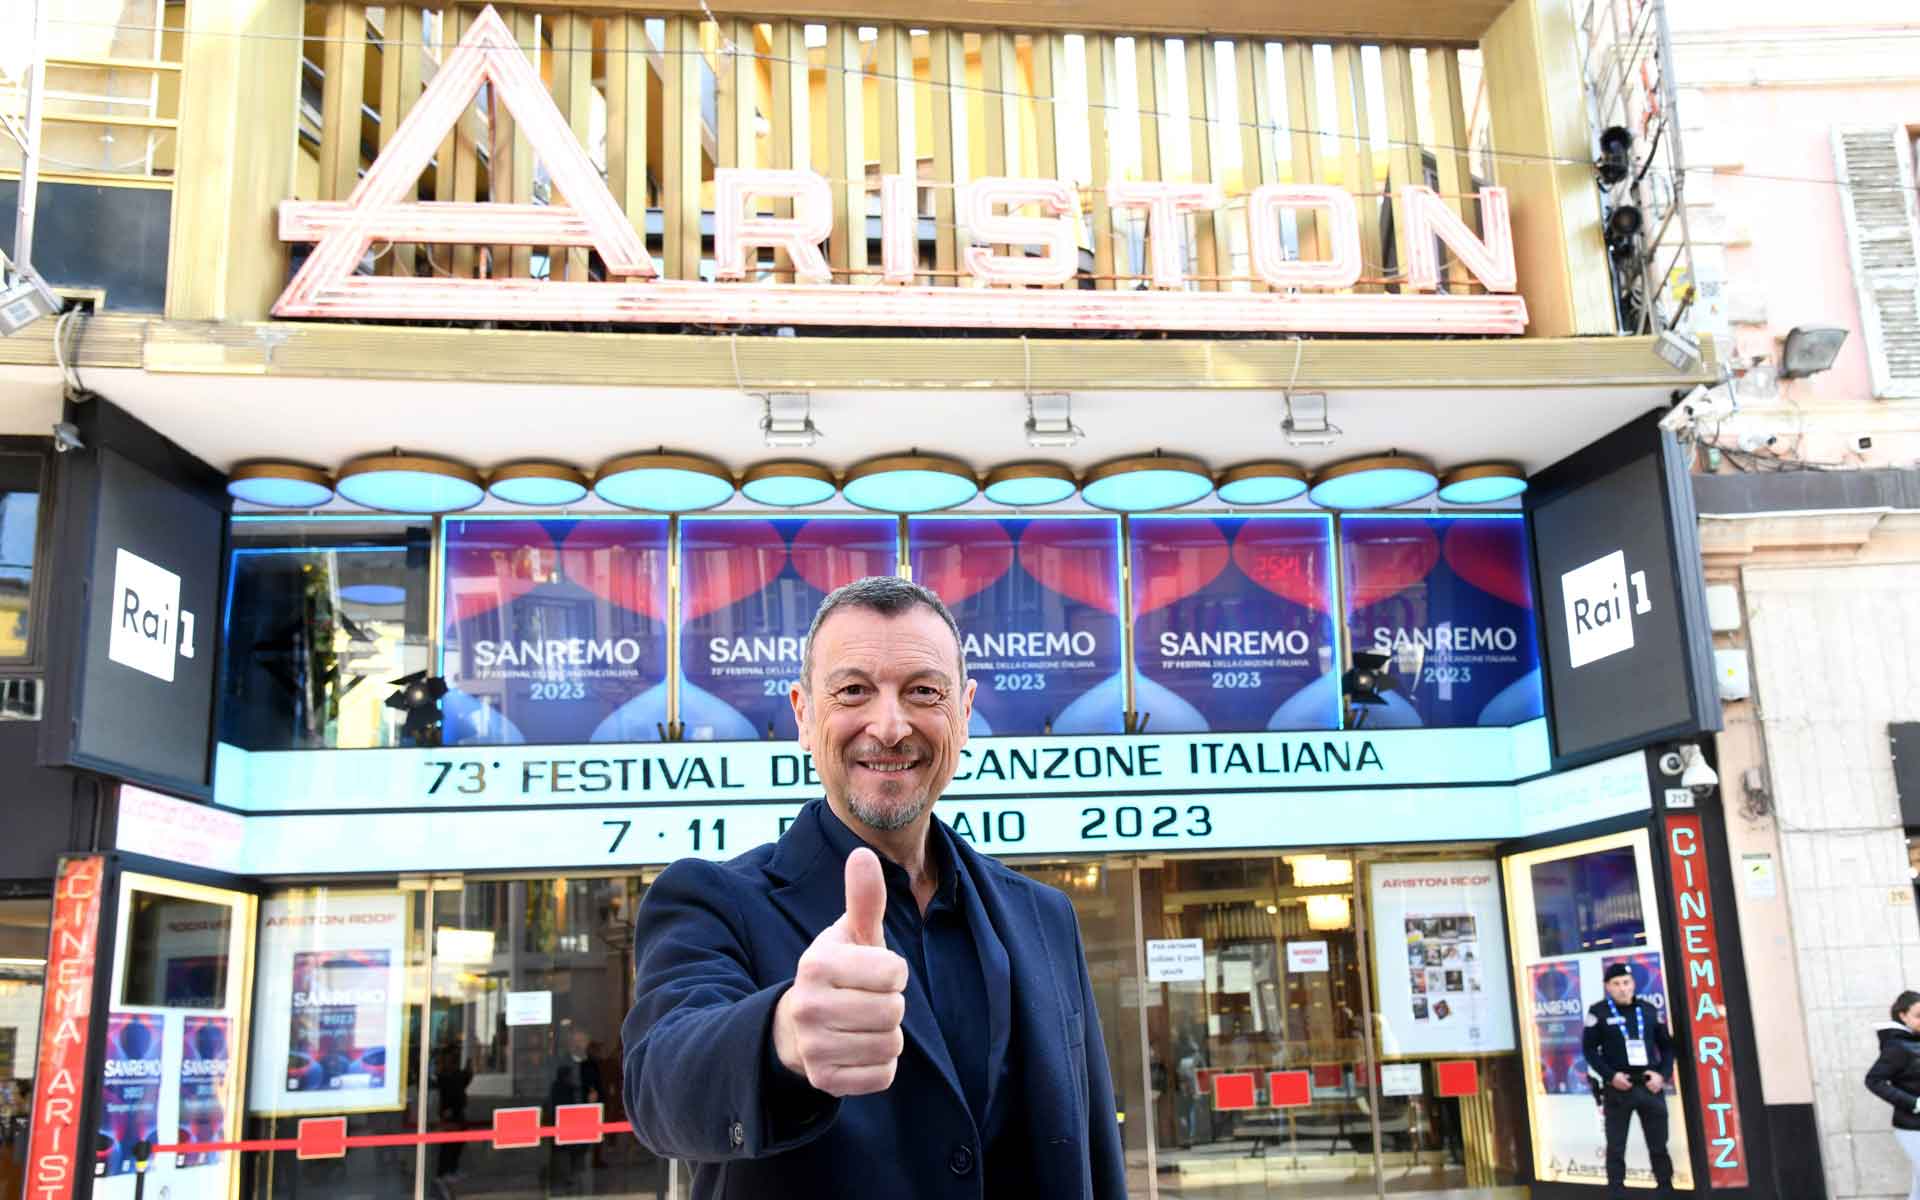 Sanremo Festival 2023 - A Guide to Italy's Iconic Music Event